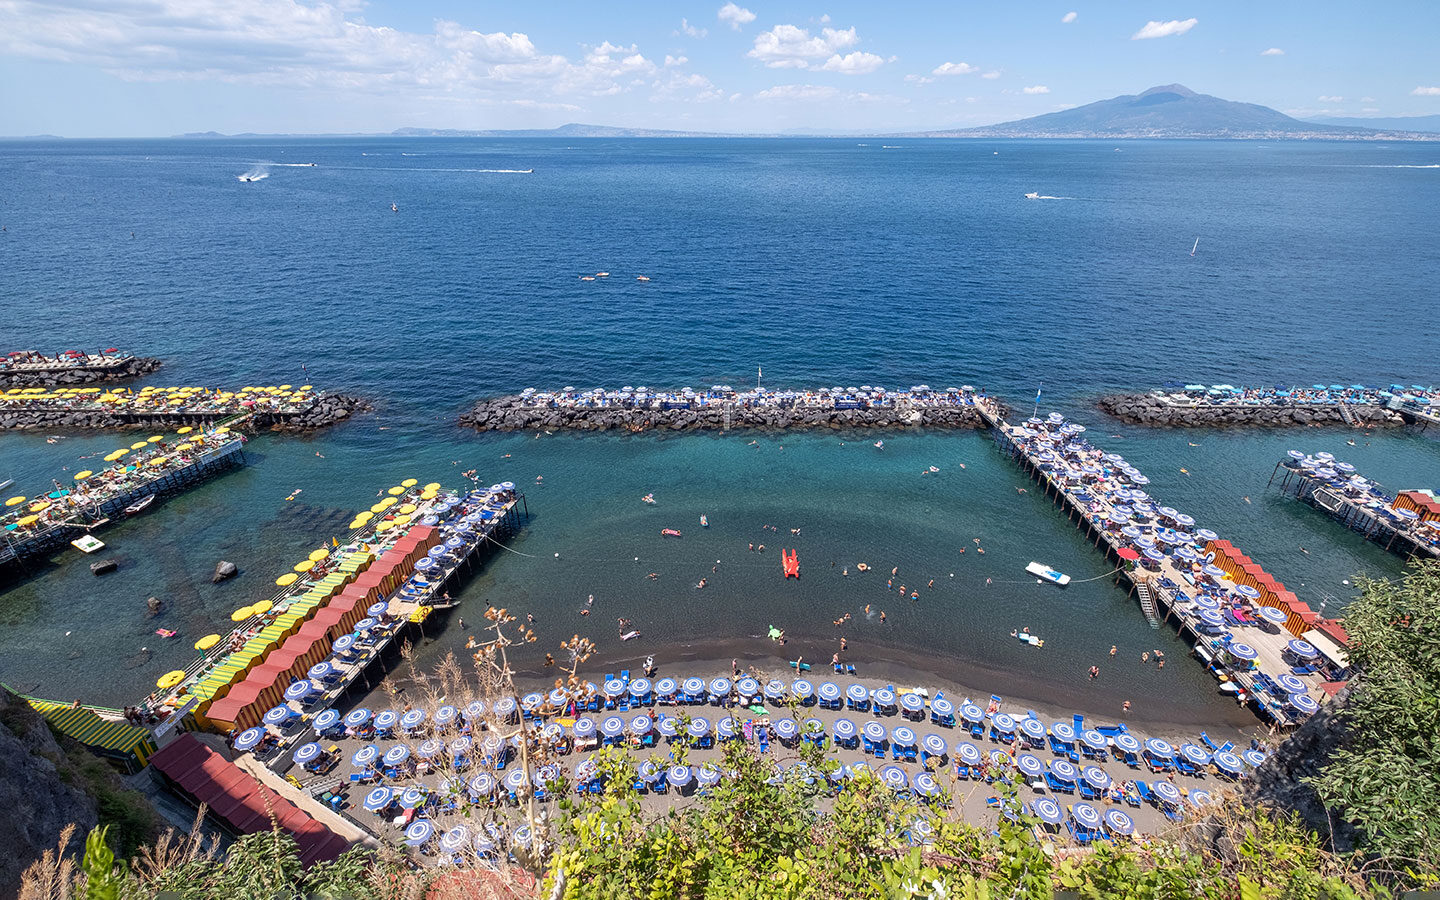 Beaches and swimming piers in Sorrento, Italy